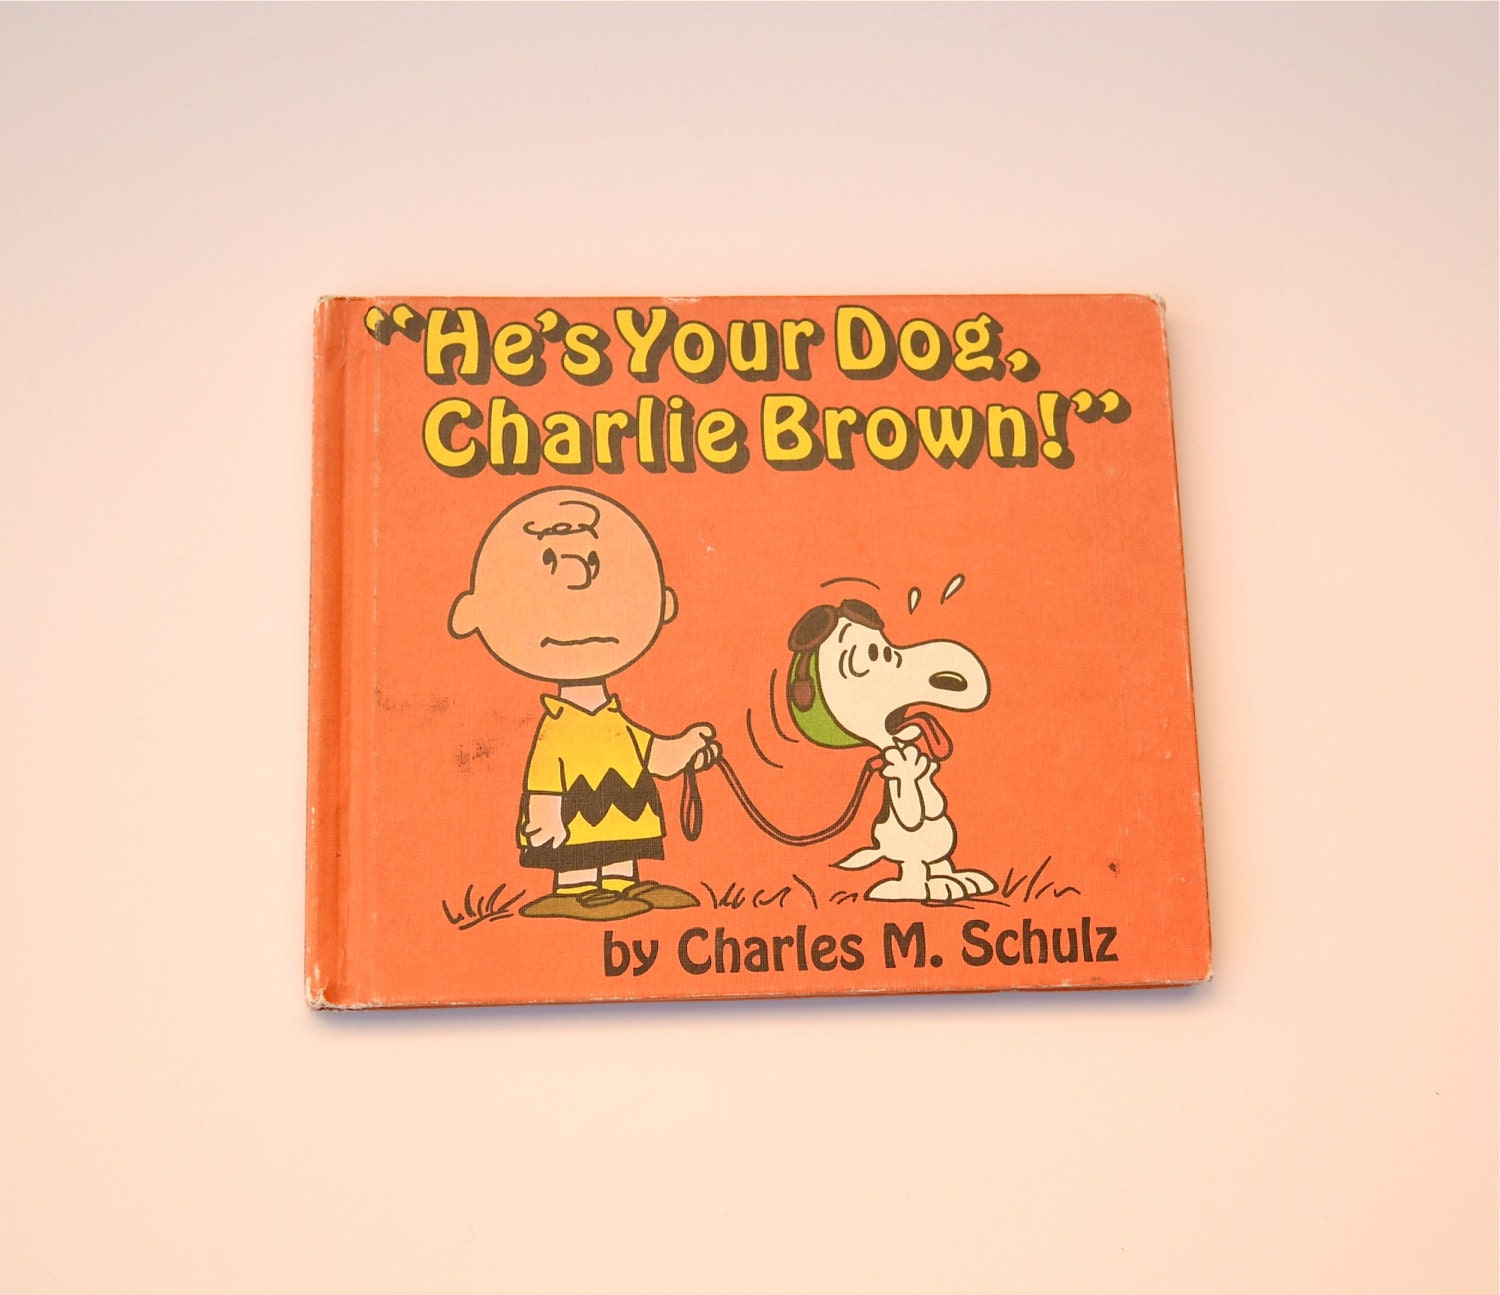 He's Your Dog Charlie Brown Book 1968 First Edition By Charles M. Schulz - LindasTimeCompass